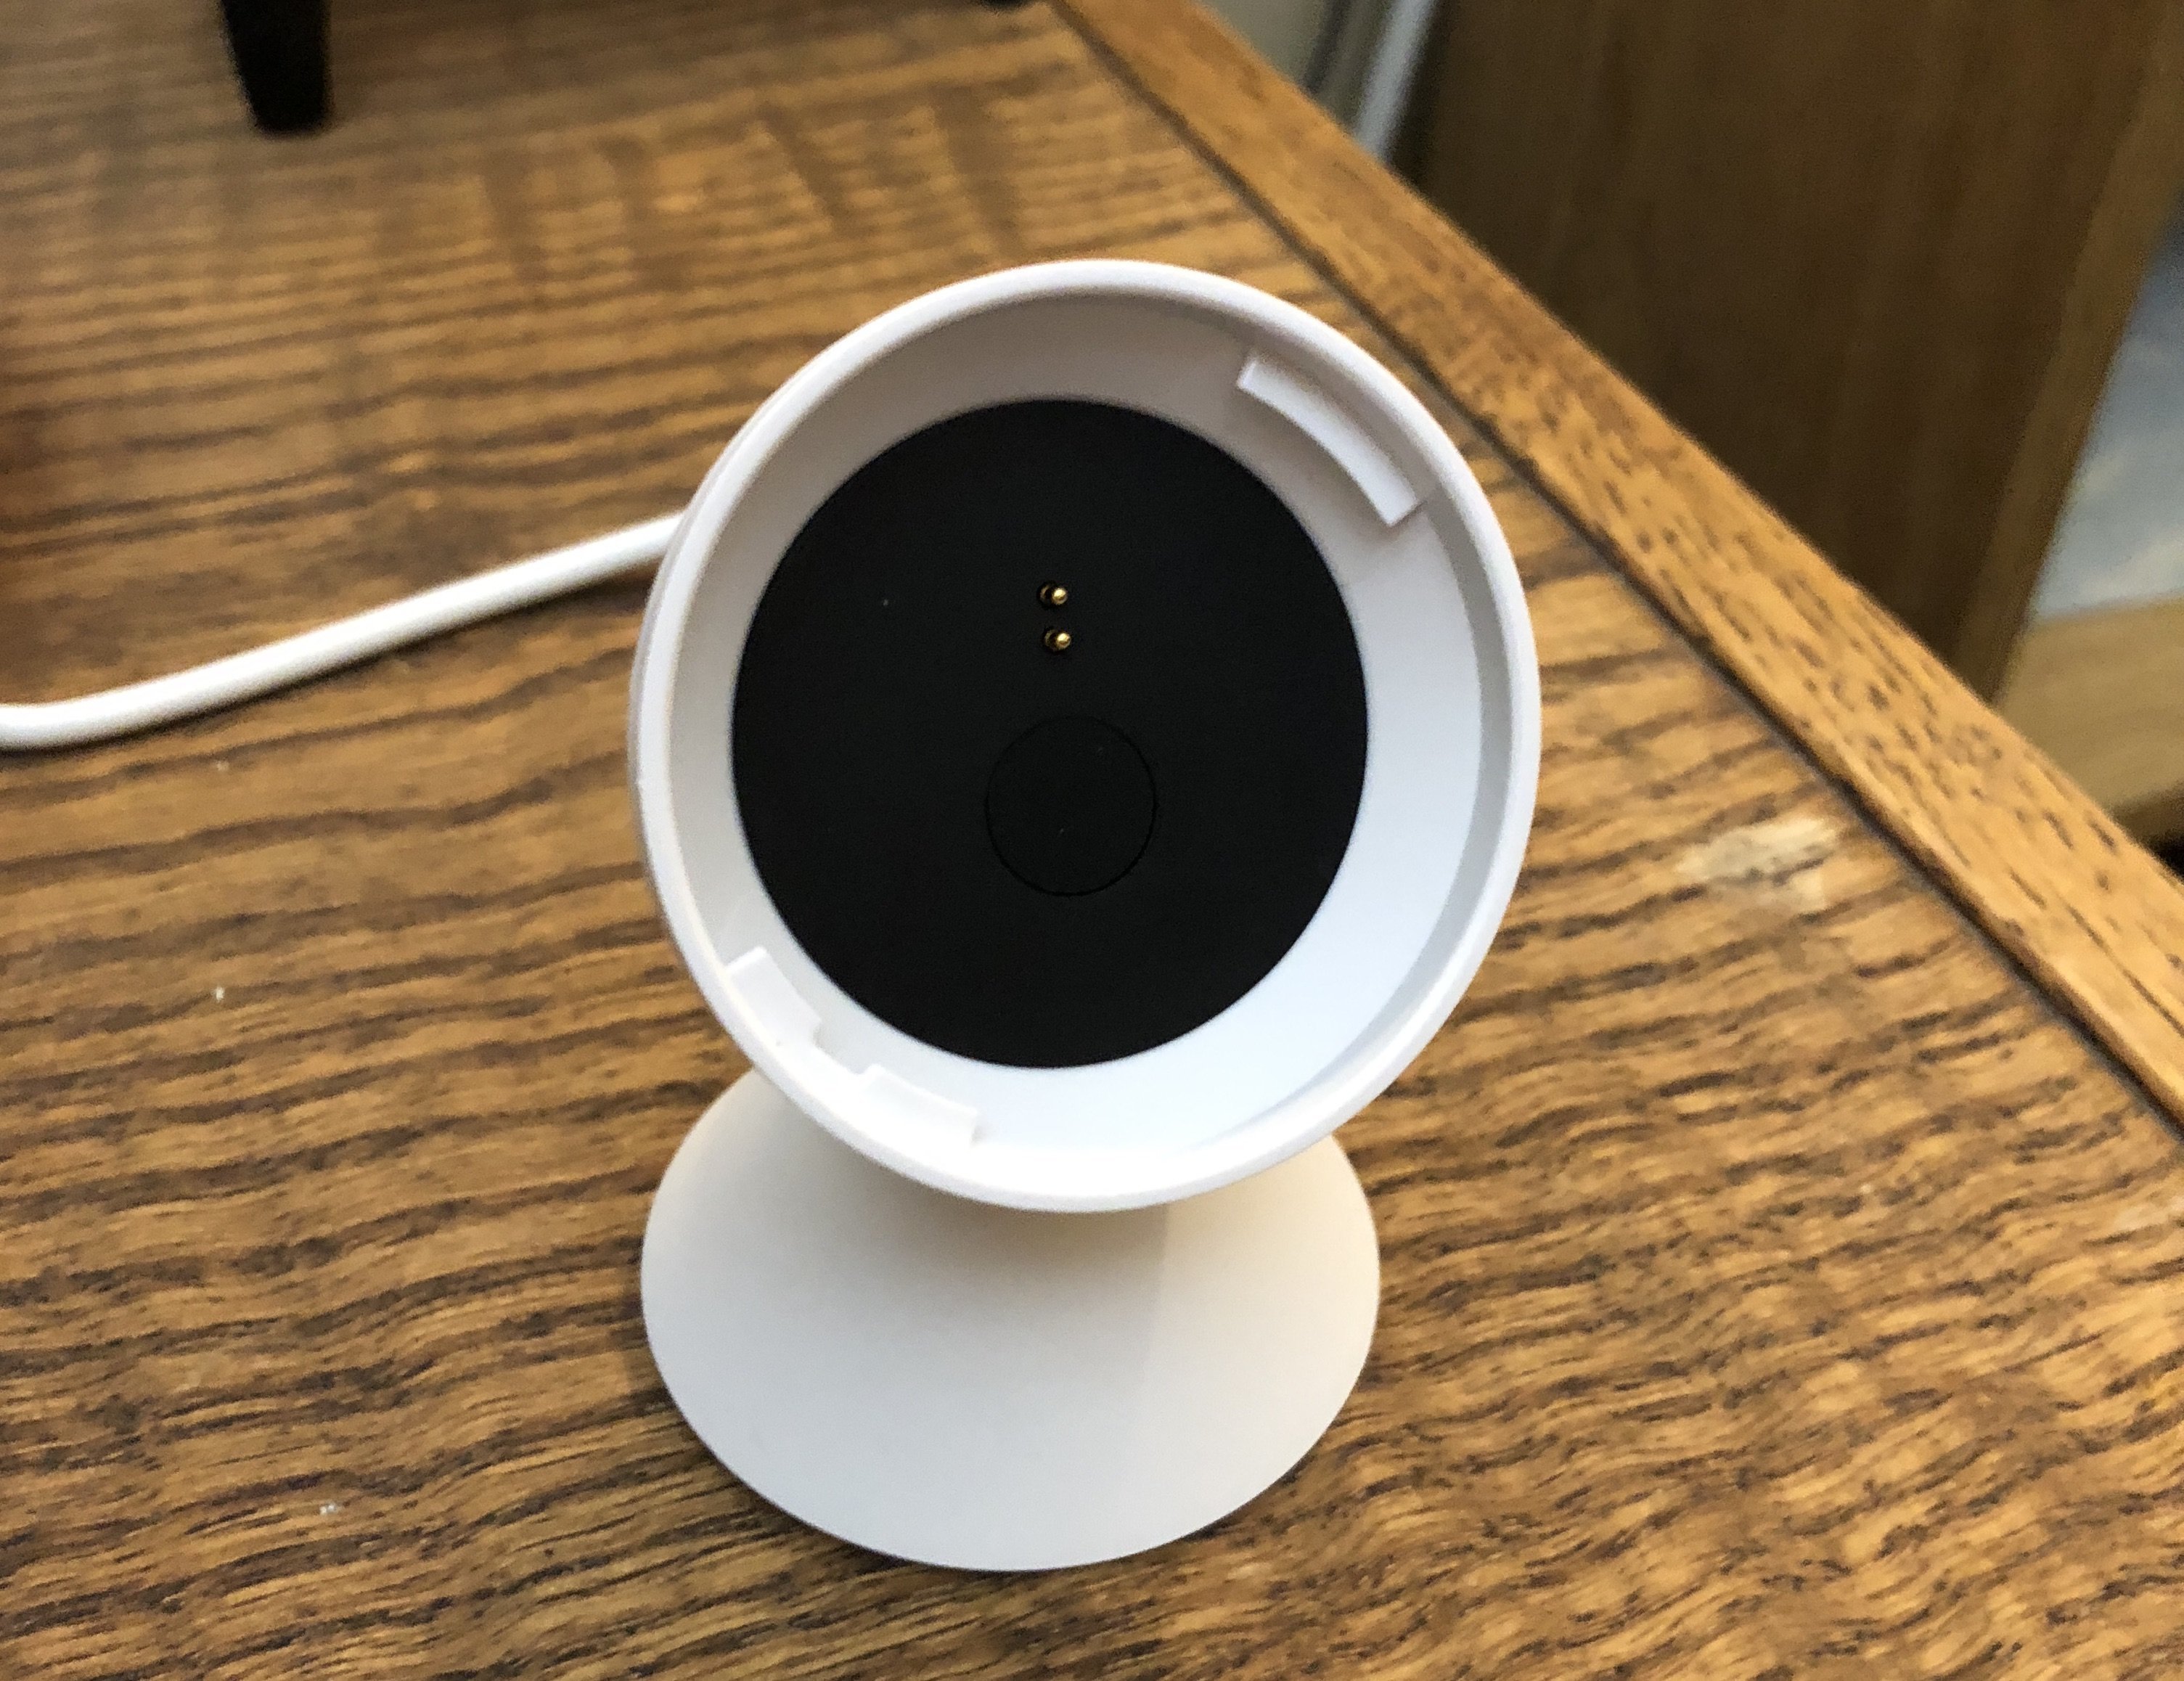 Lamme Slagskib fredelig Review: Logitech Circle 2 Wi-Fi camera is a reliable upgrade - Gearbrain